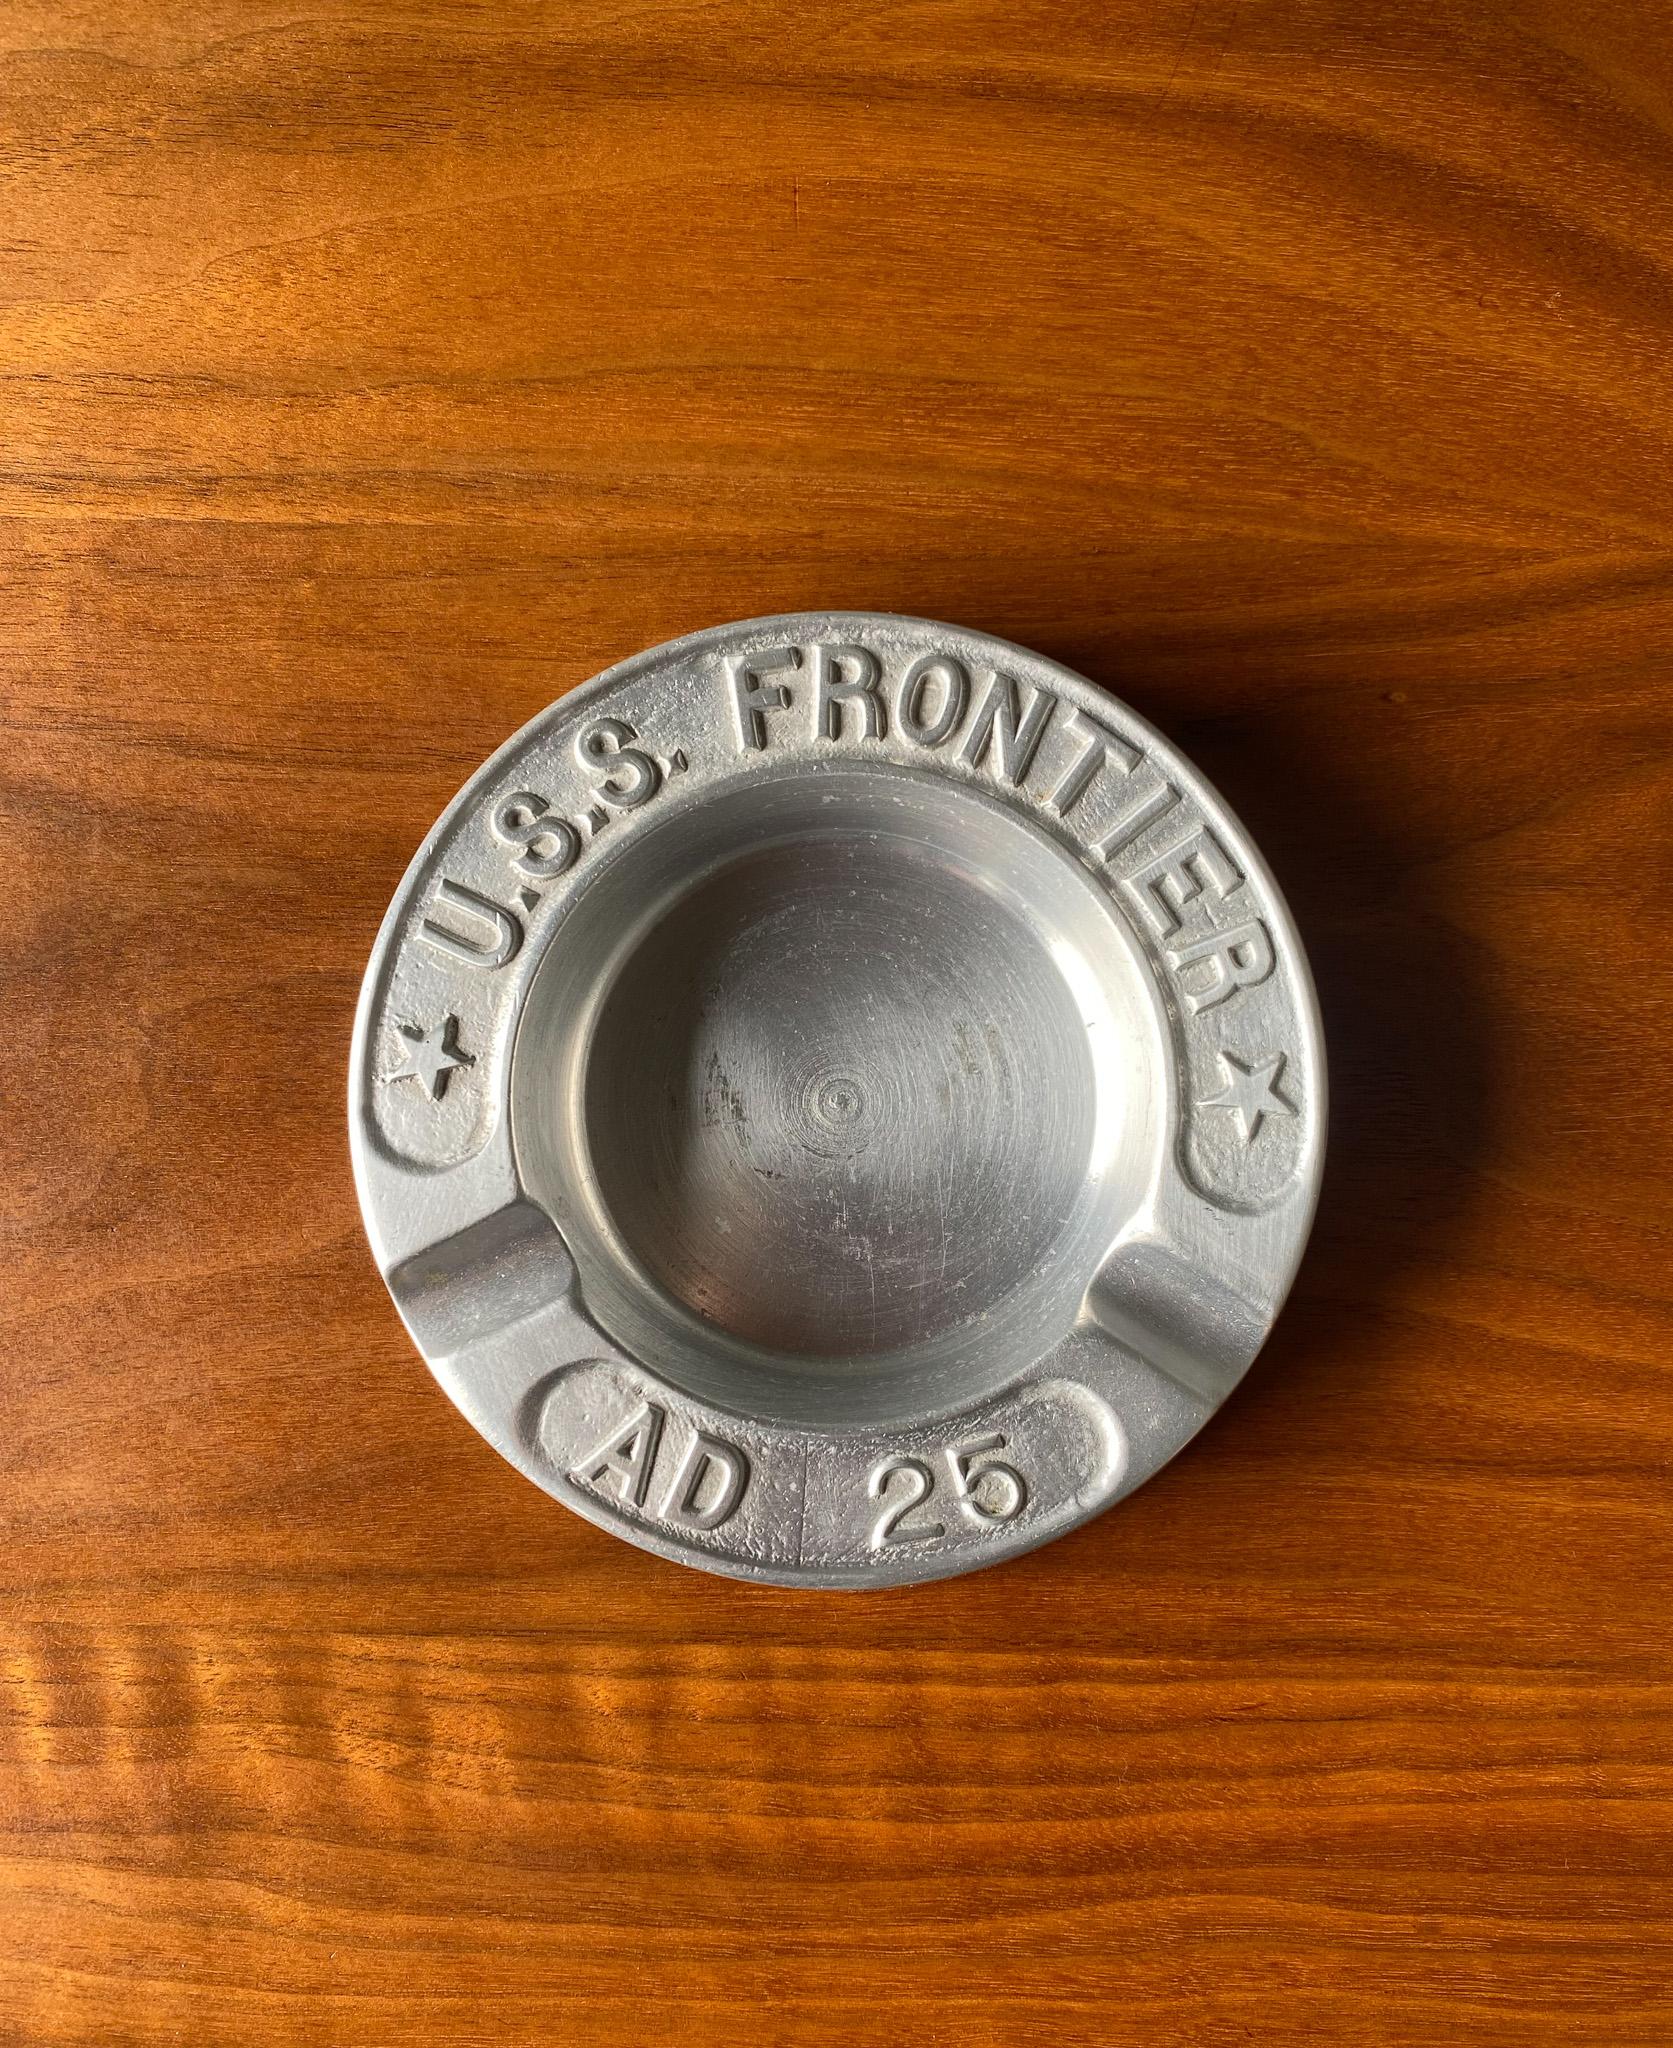 American Vintage U.S.S Frontier AD 25 Destroyer Aluminum US Navy Ashtray  For Sale